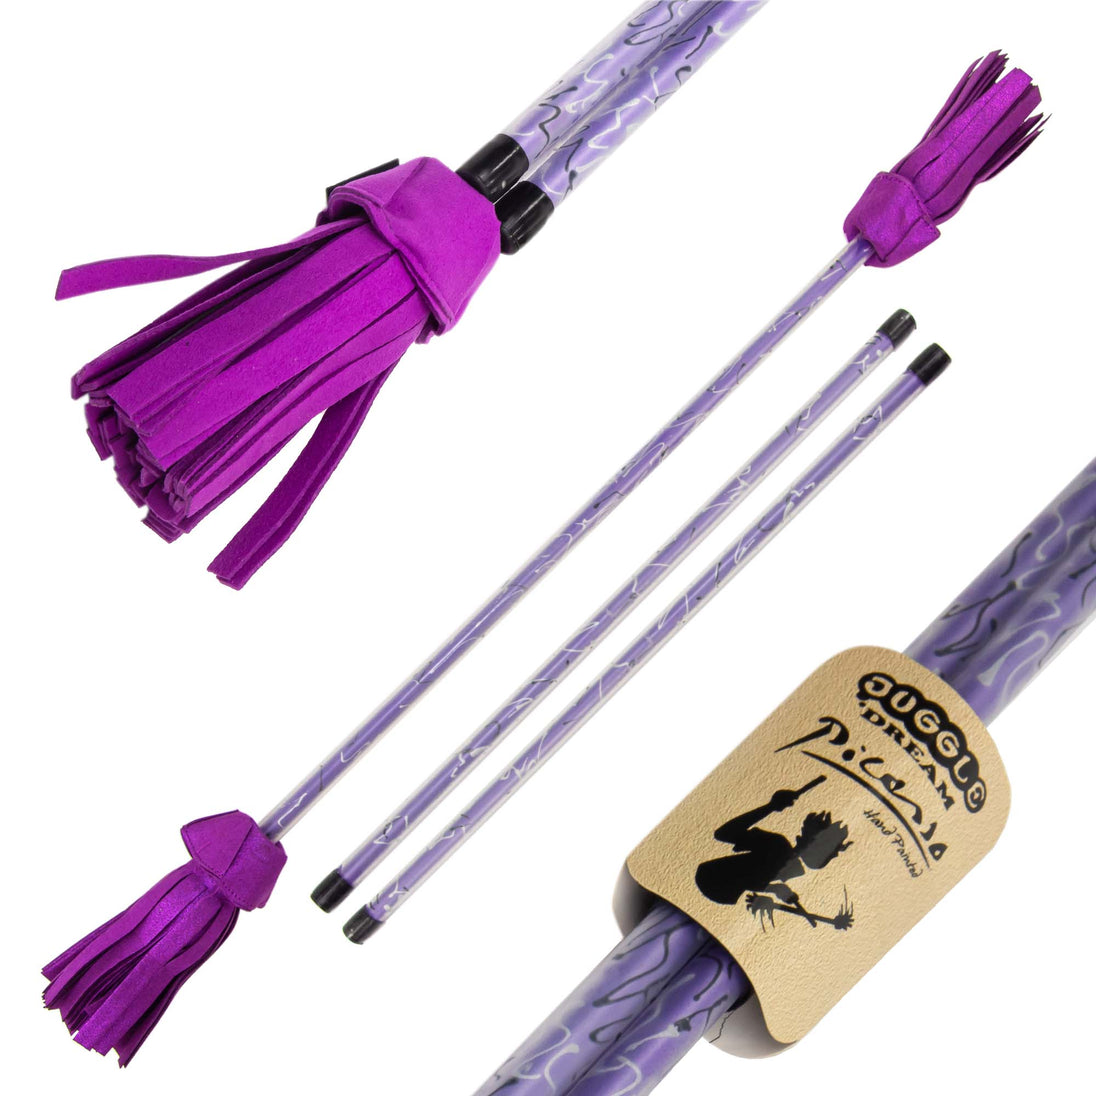 Purple full size Picasso Flower Stick with Handsticks with close-up of label and tassels